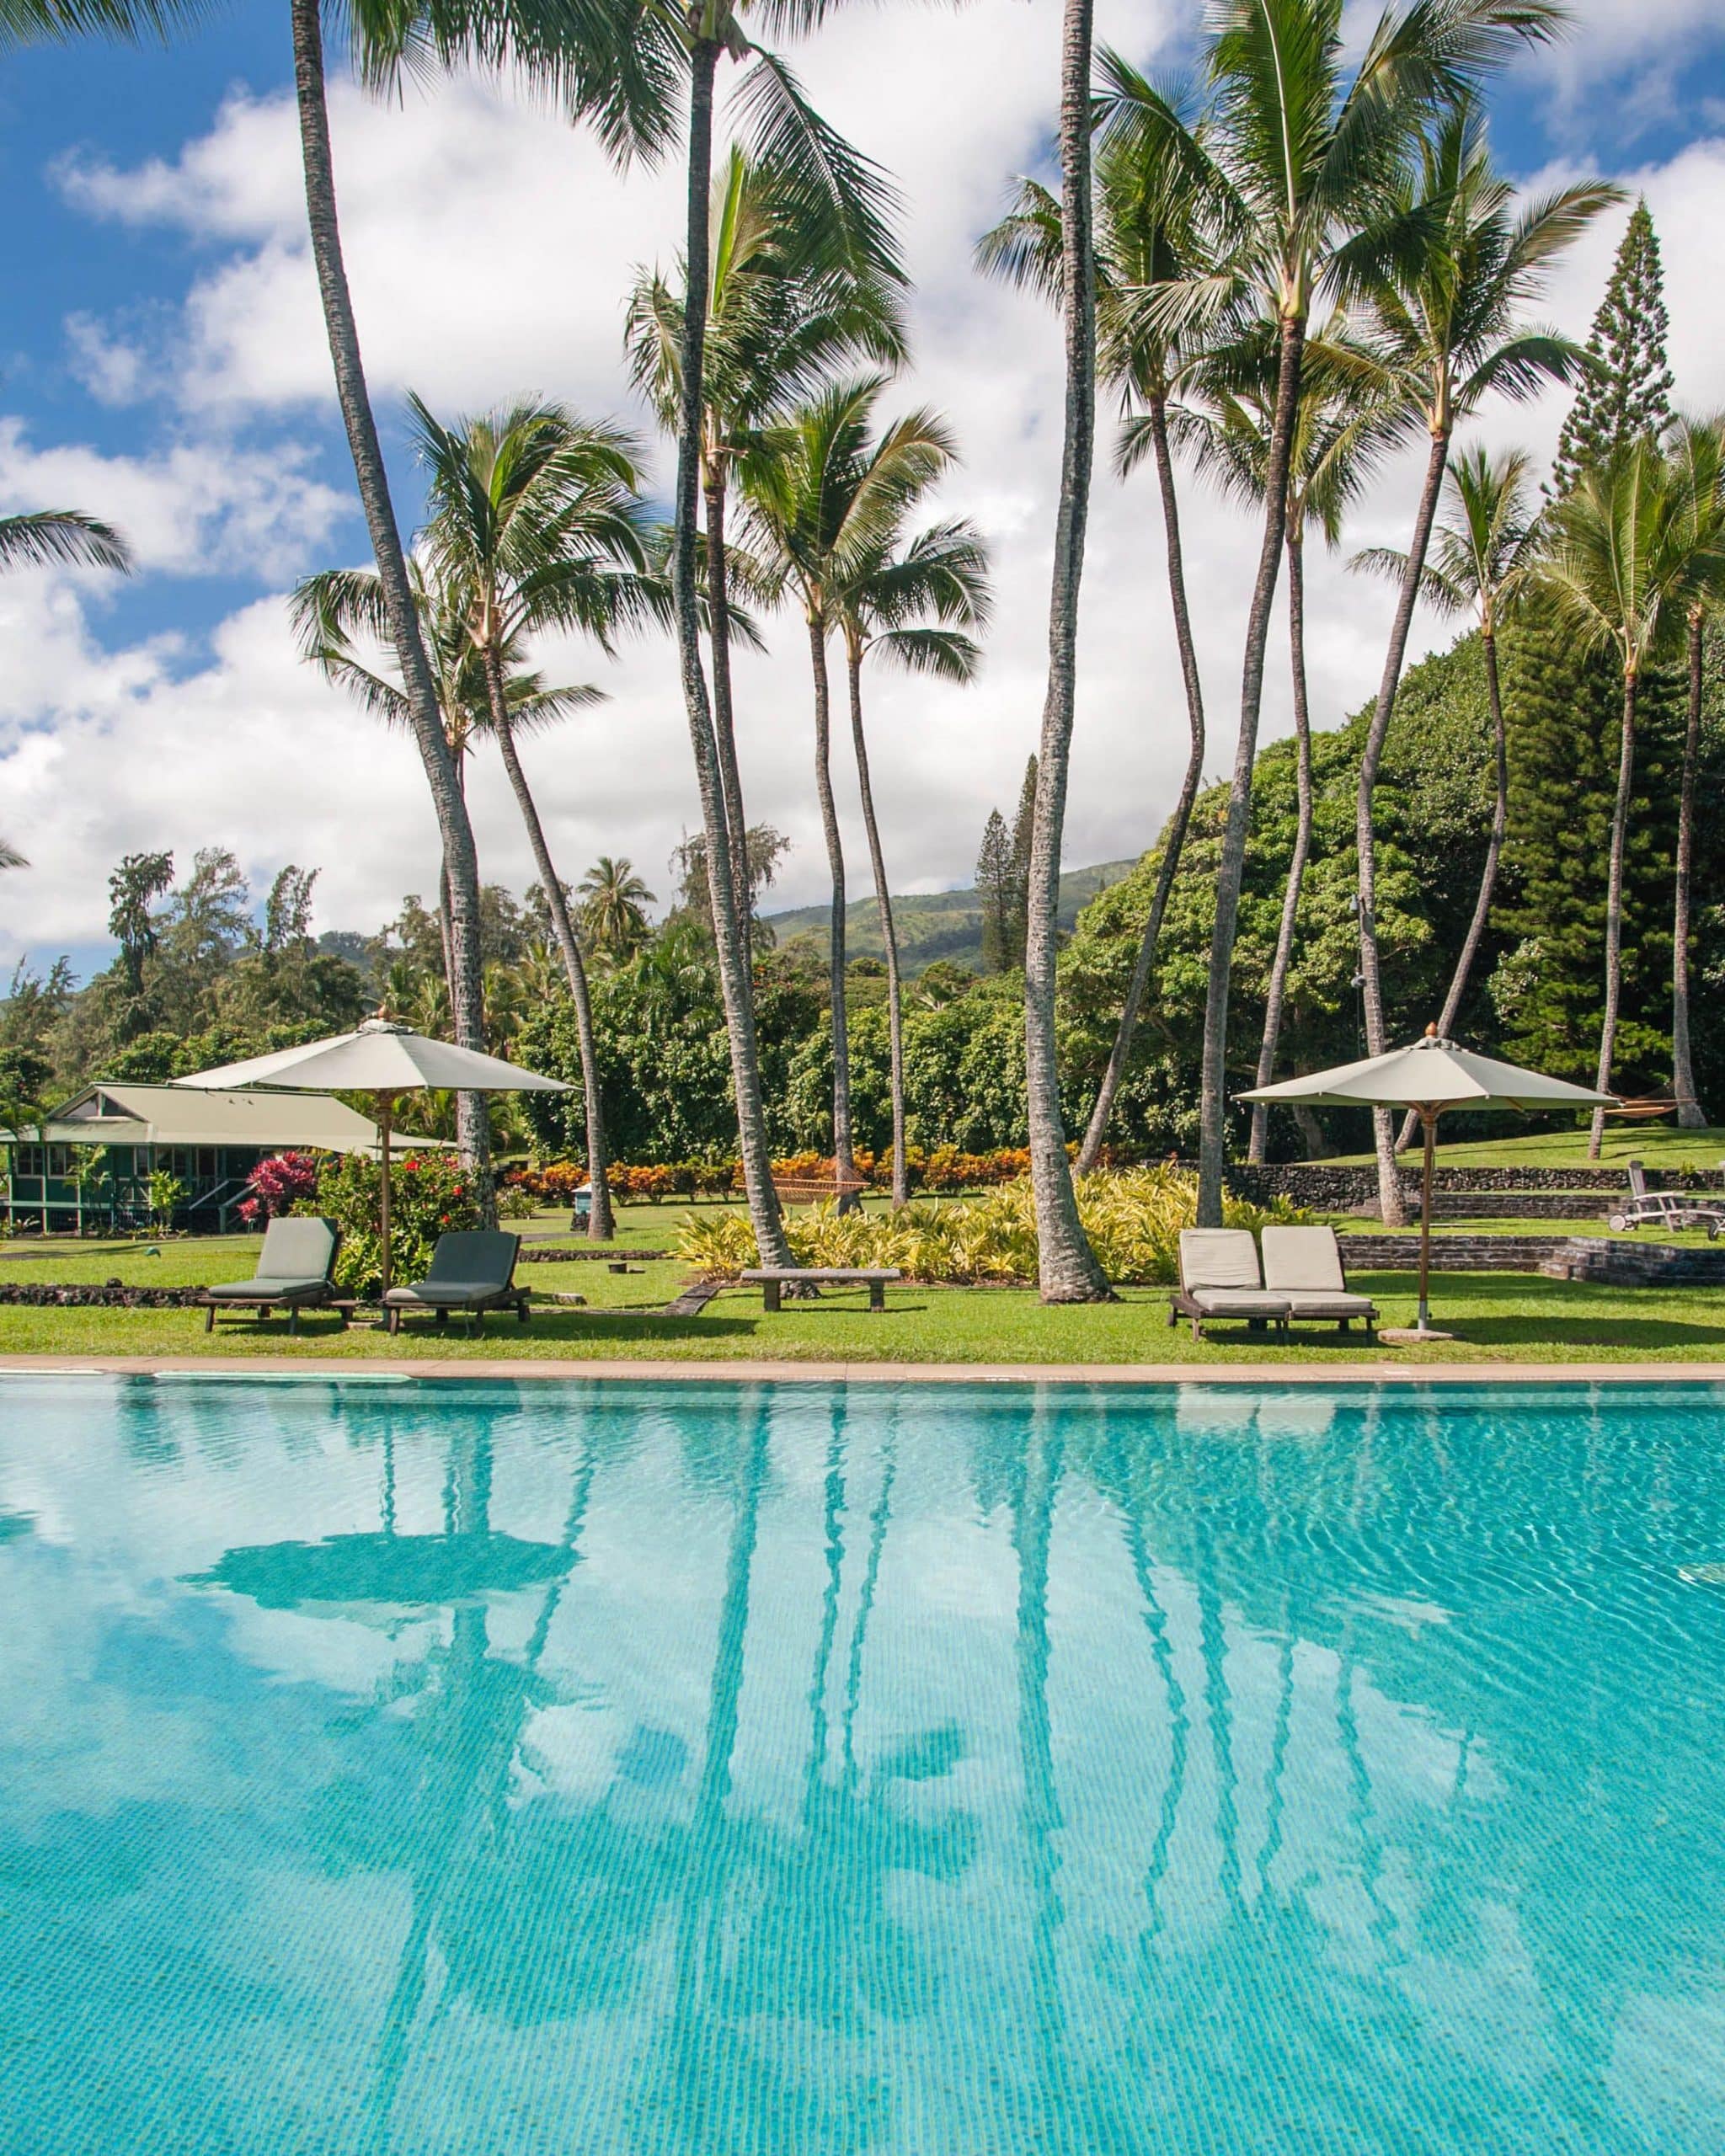 Travaasa Hana, Maui Review: What To REALLY Expect If You Stay